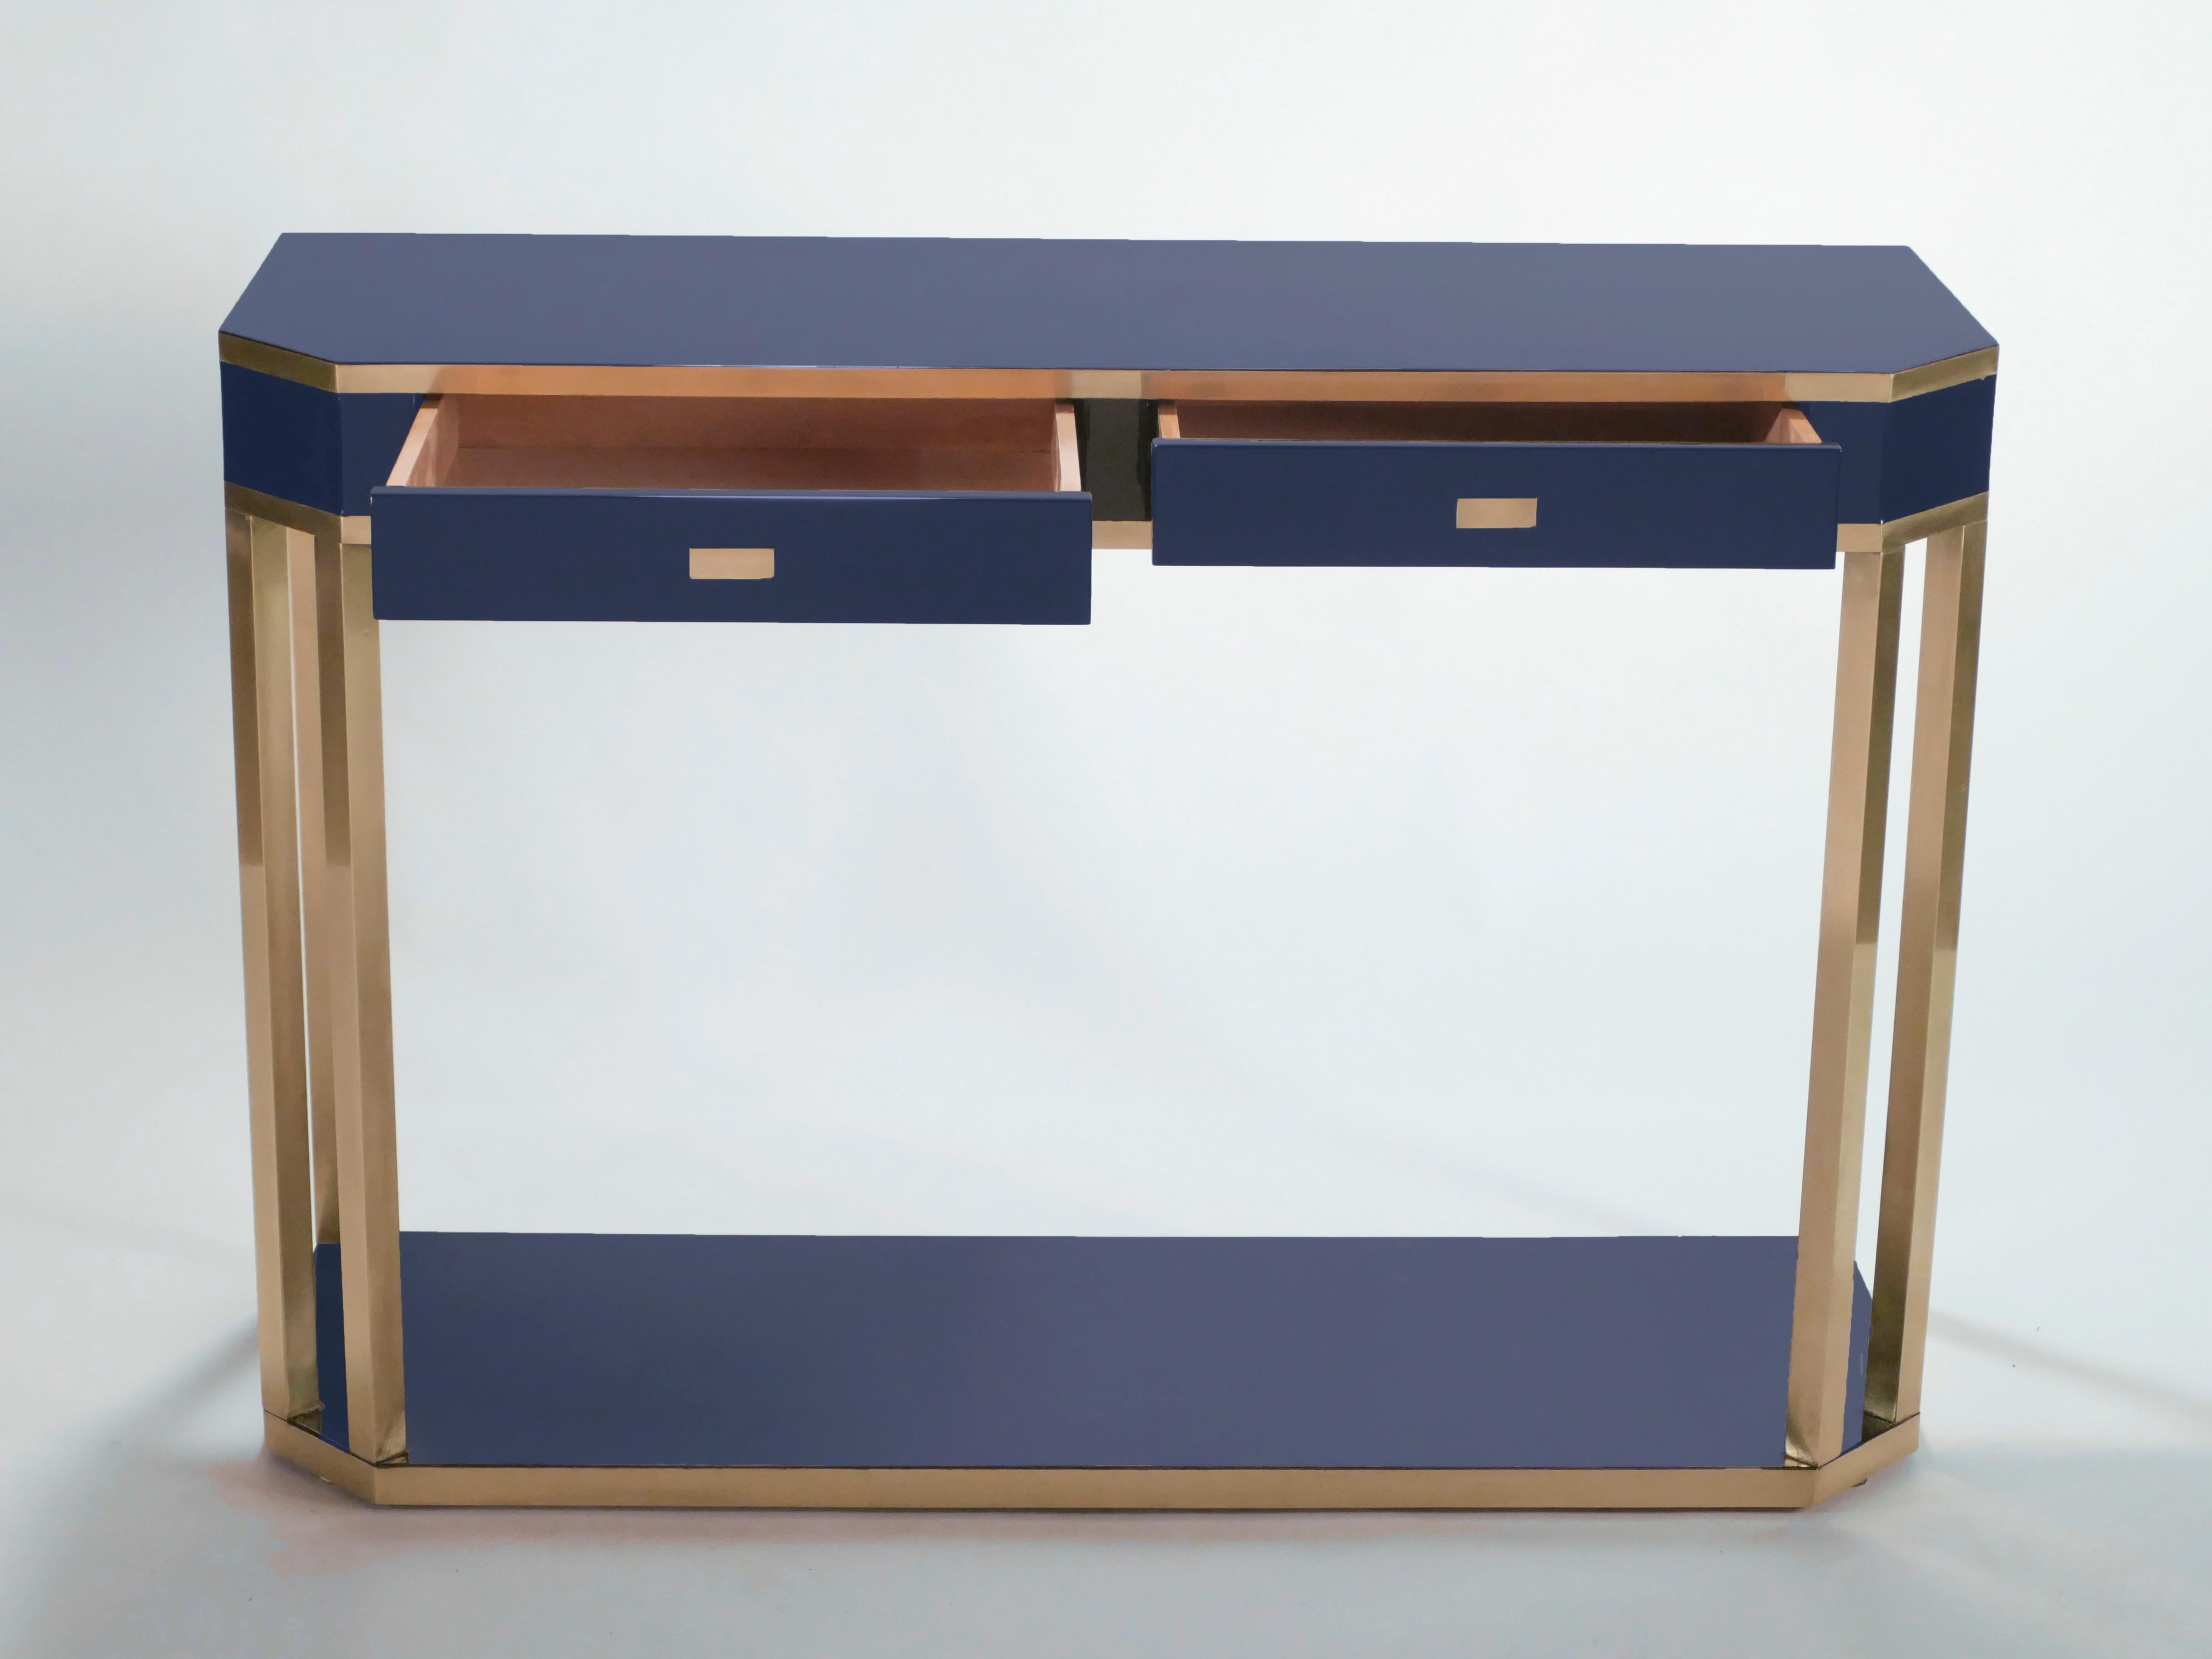 With a shining blue lacquered top, and sharply geometric brass legs and details, this console table carries a stellar futuristic midcentury aesthetic into the contemporary home. Its boxy yet sophisticated style is typical of both the 1970s and